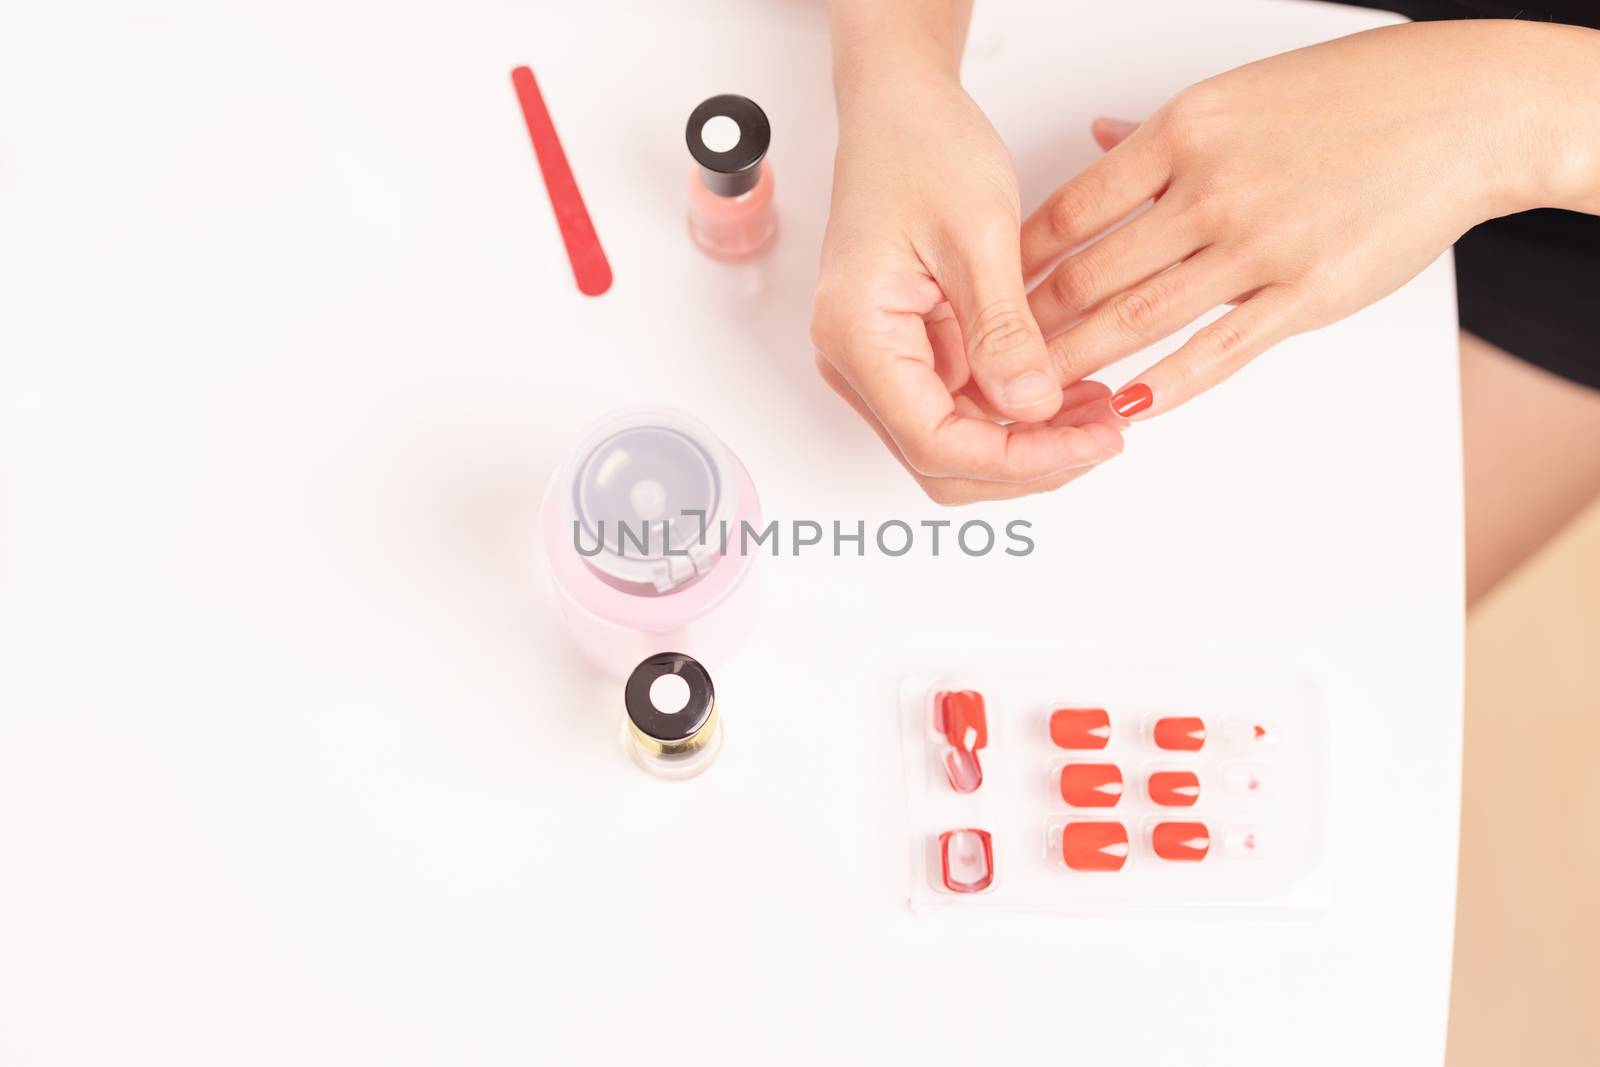 women manicure and attaches a nail shape during the procedure of by psodaz